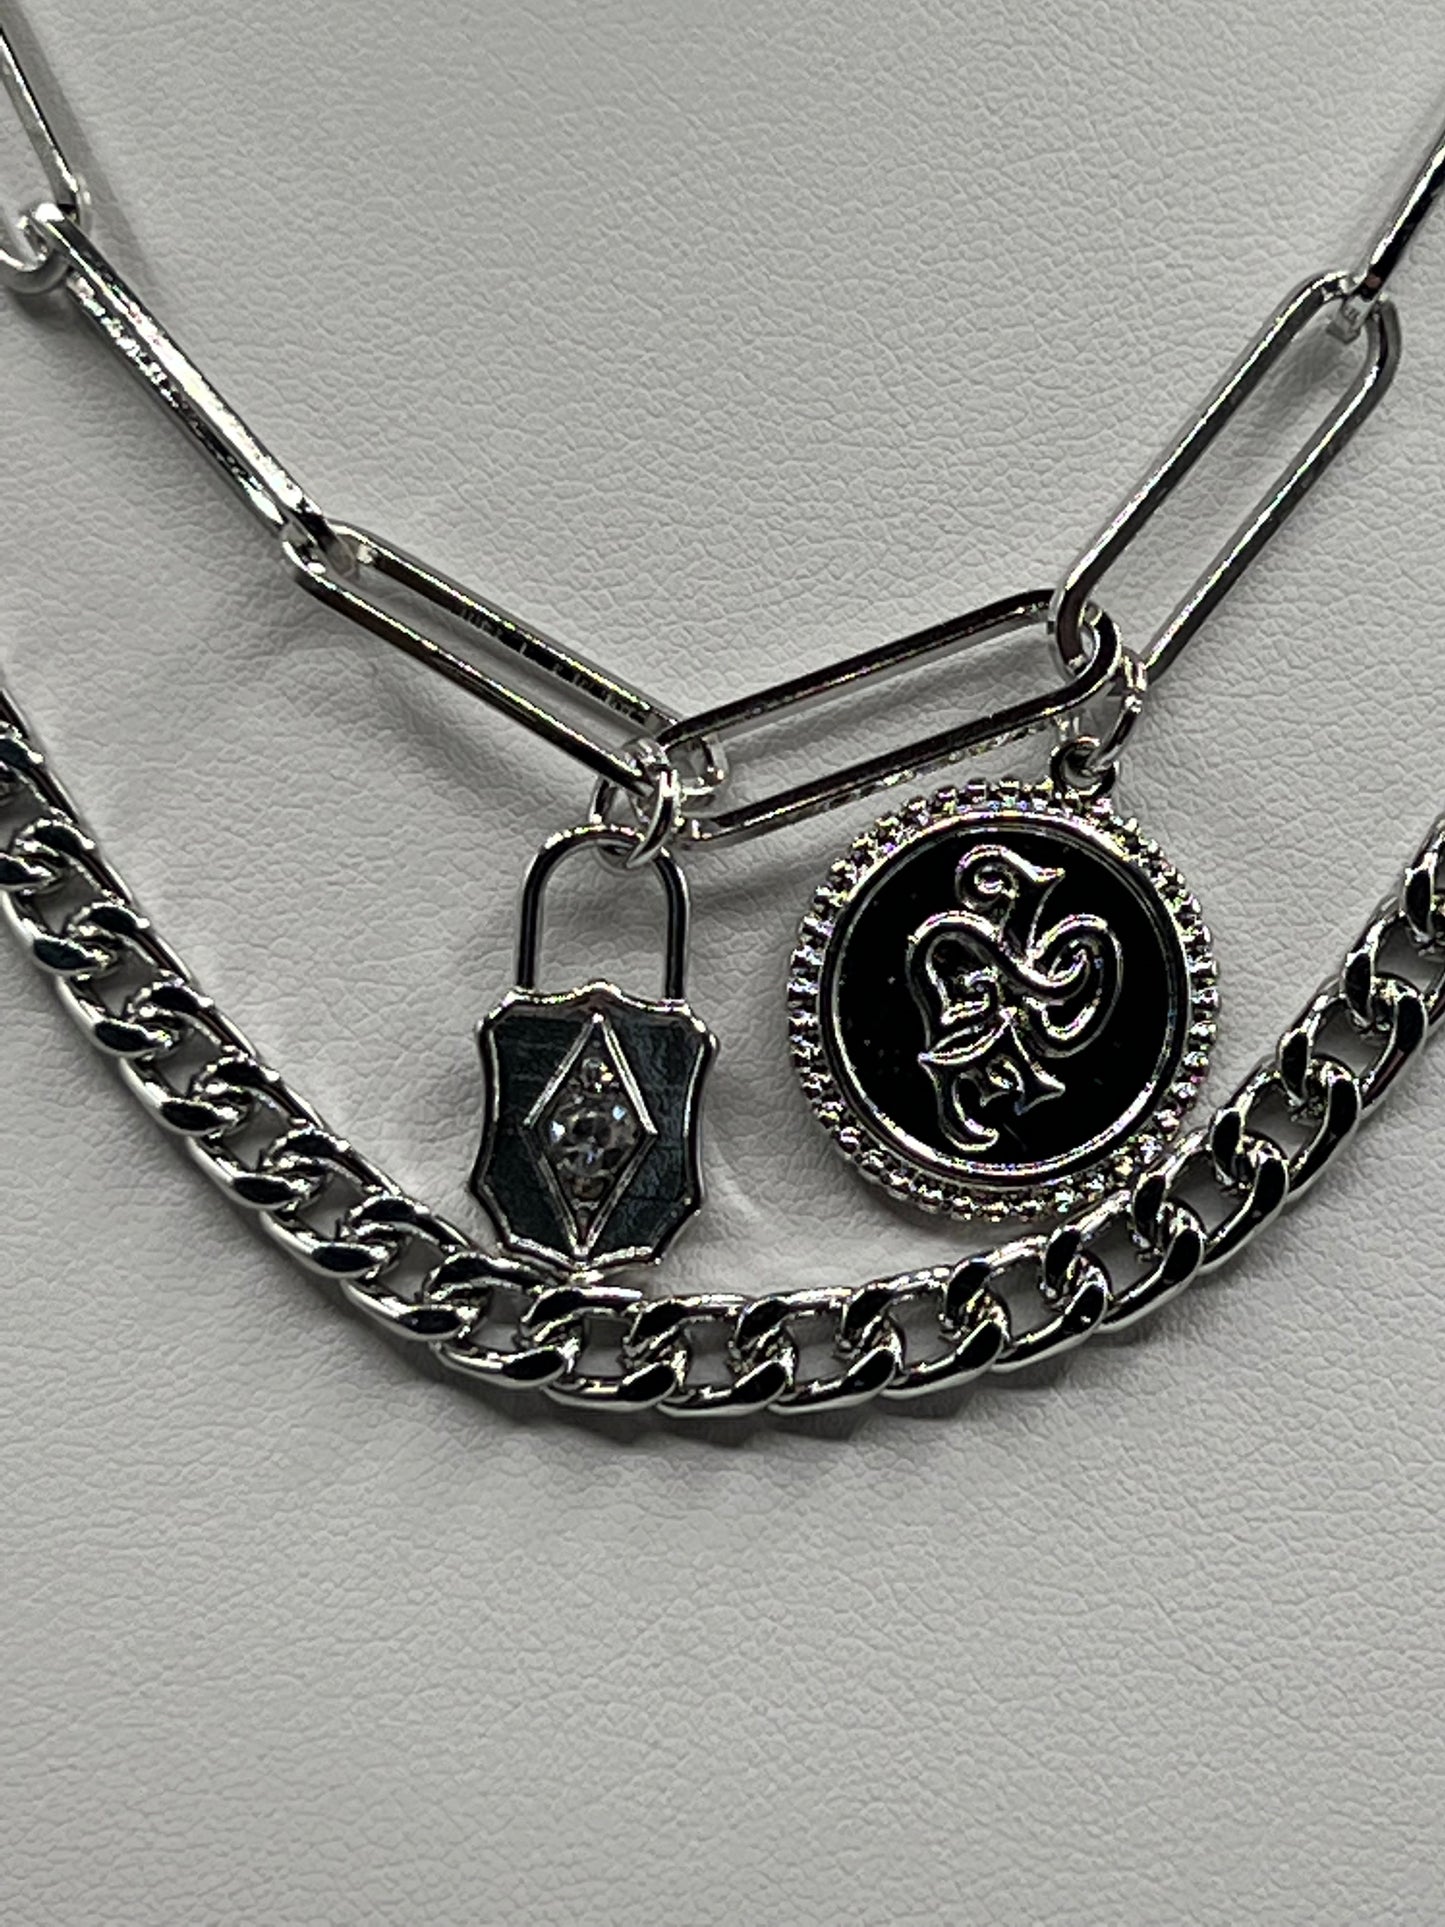 NEW ~ The Sandi ~Double Stranded Silvertone Necklace ~ Lock w/ Crystal & Medallion